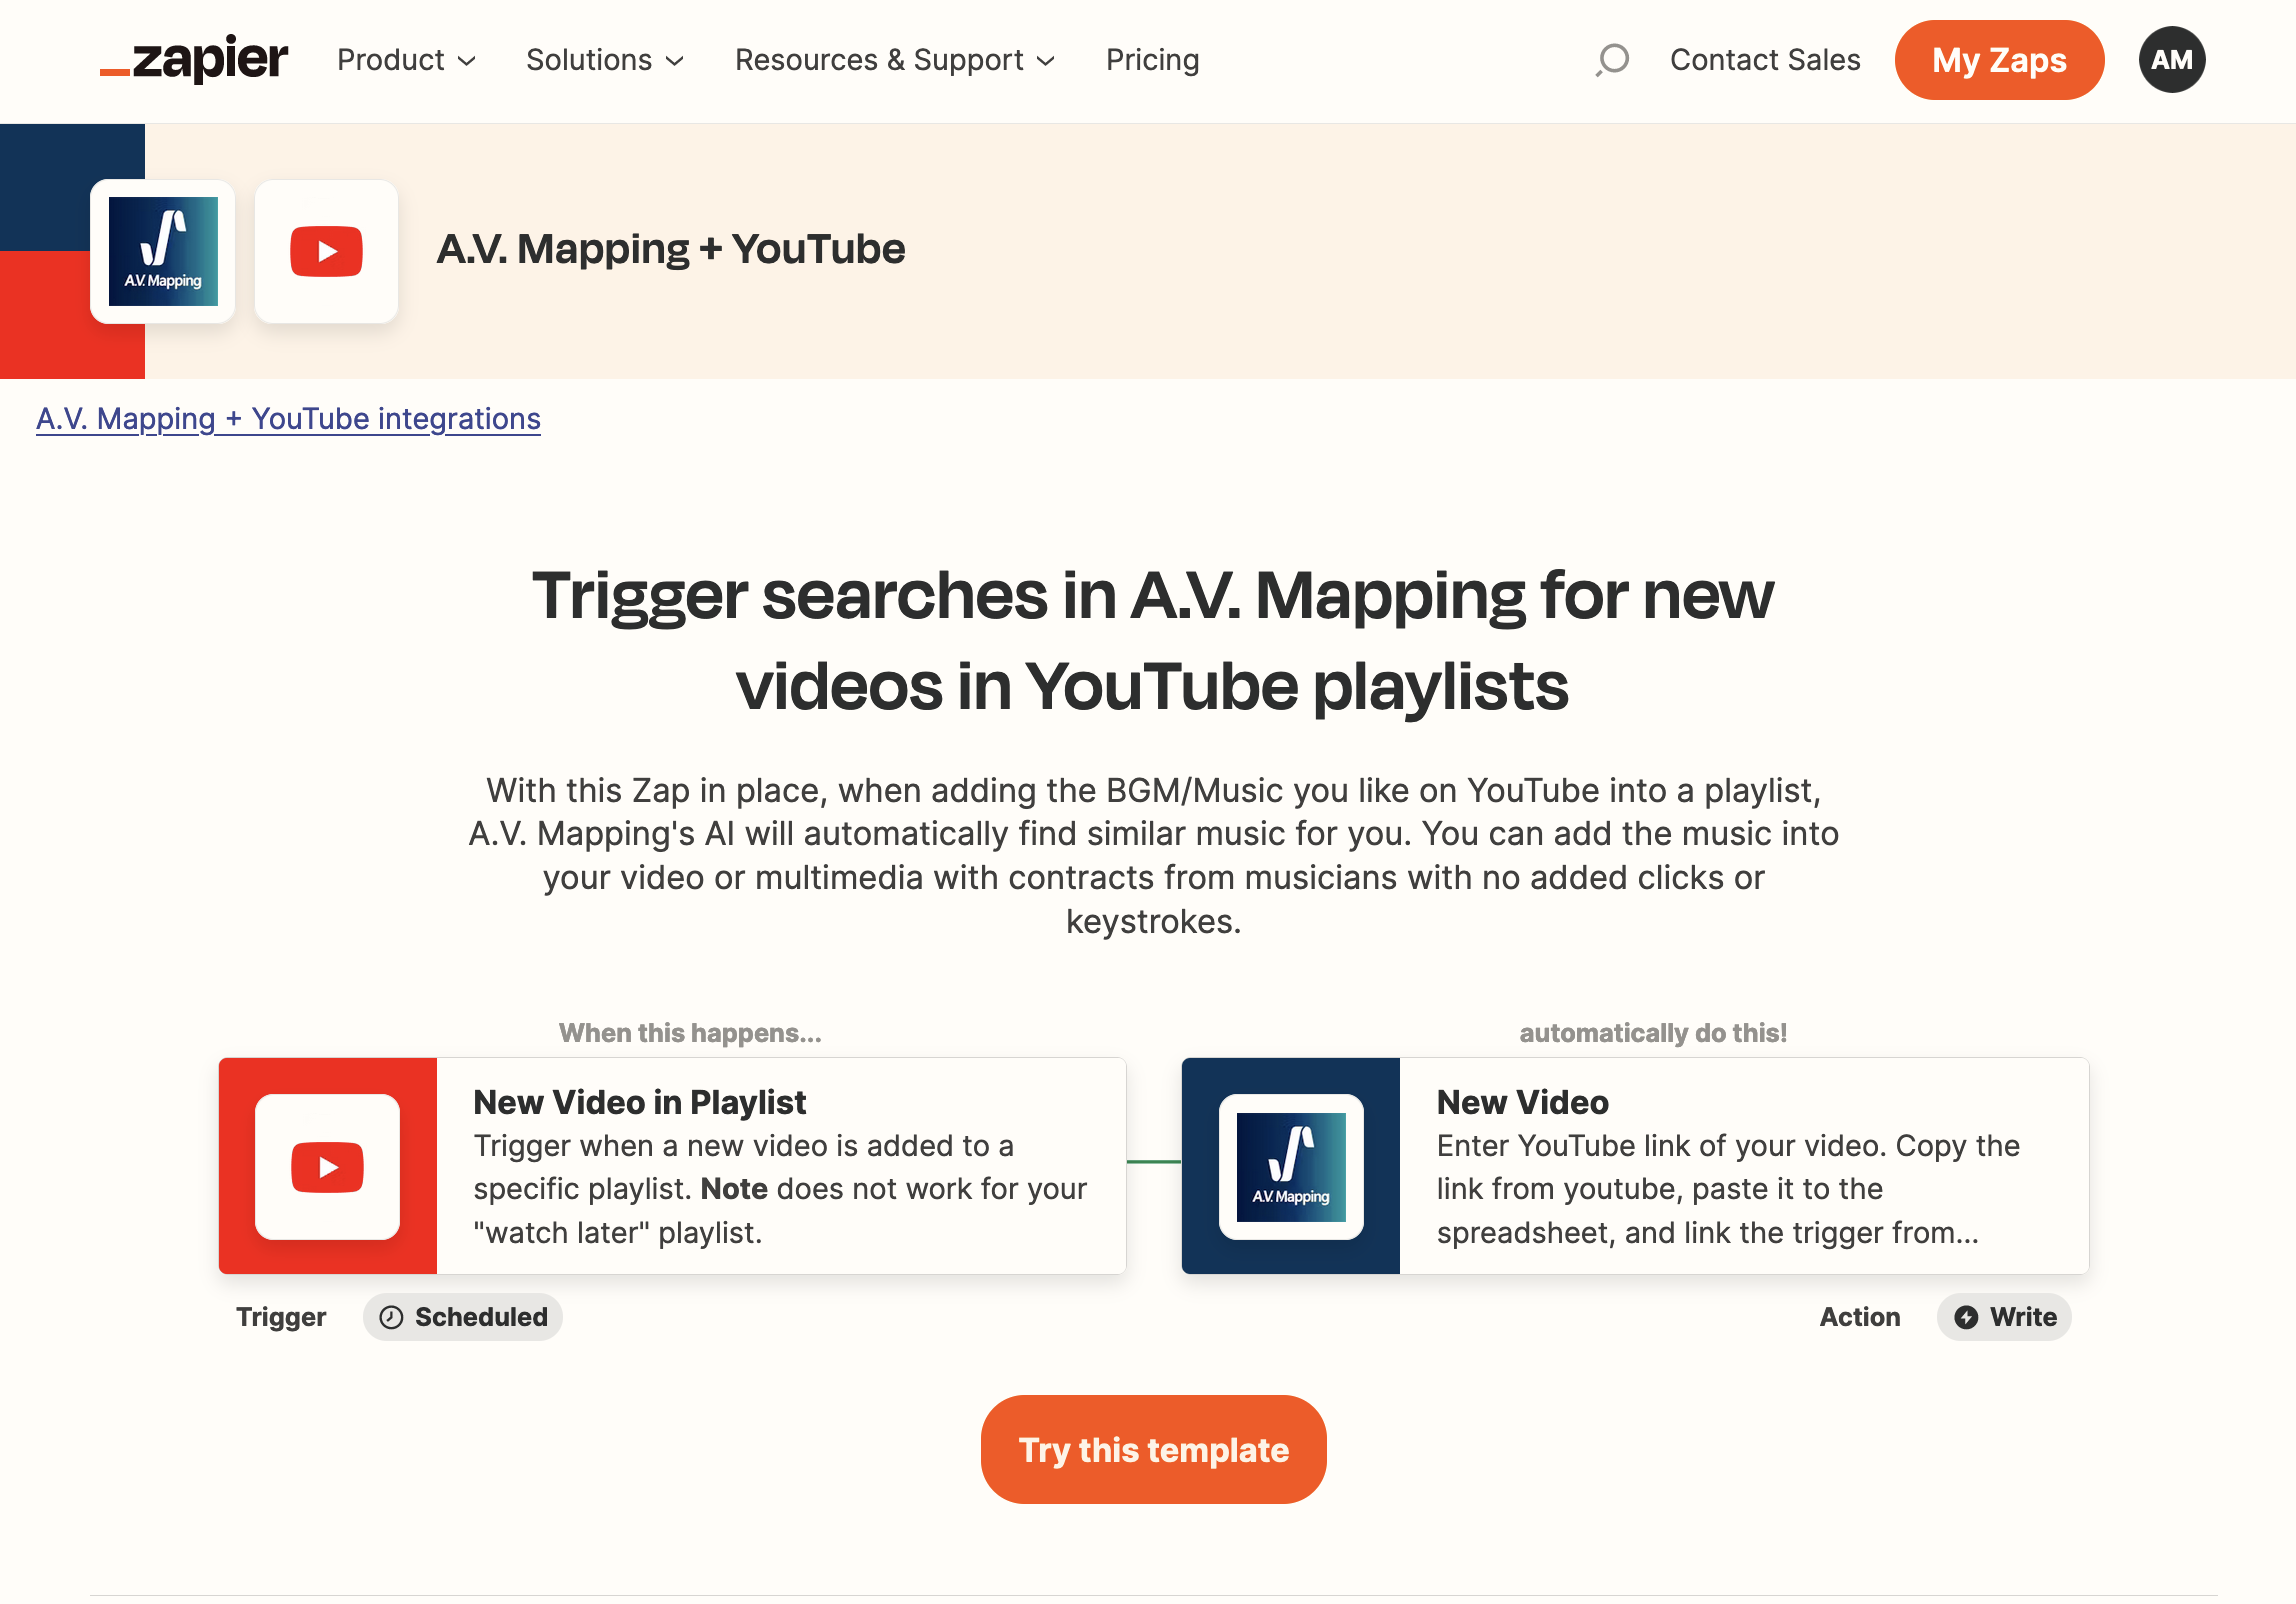 https://avmapping.co/blog/images/1-zapier2-template.png